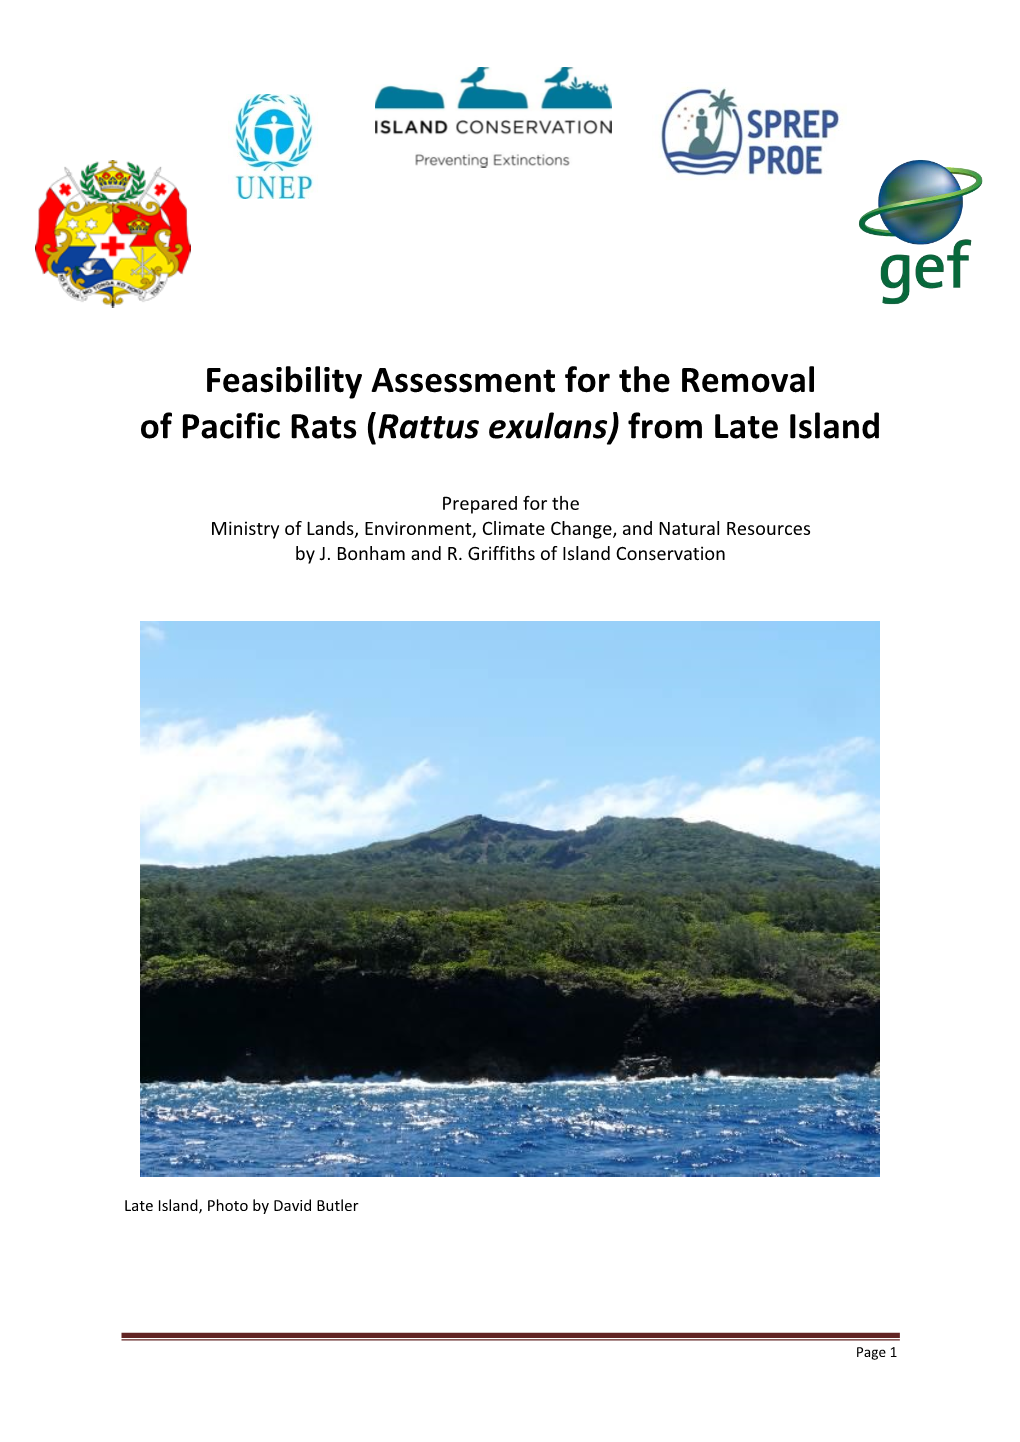 Feasibility Assessment for the Removal of Pacific Rats (Rattus Exulans) from Late Island